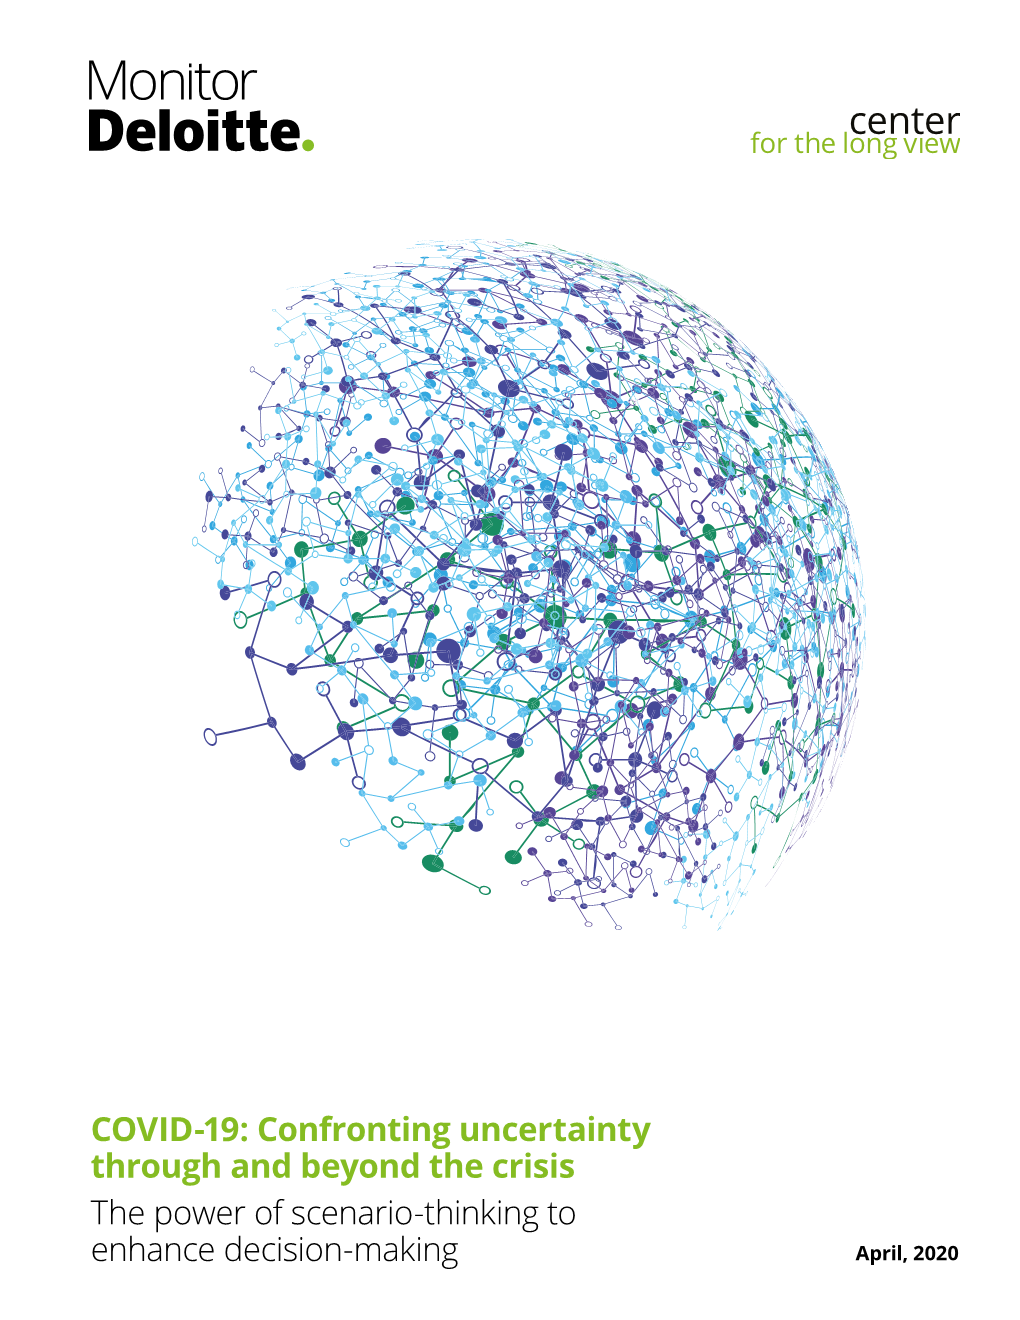 COVID-19: Confronting Uncertainty Through and Beyond the Crisis The